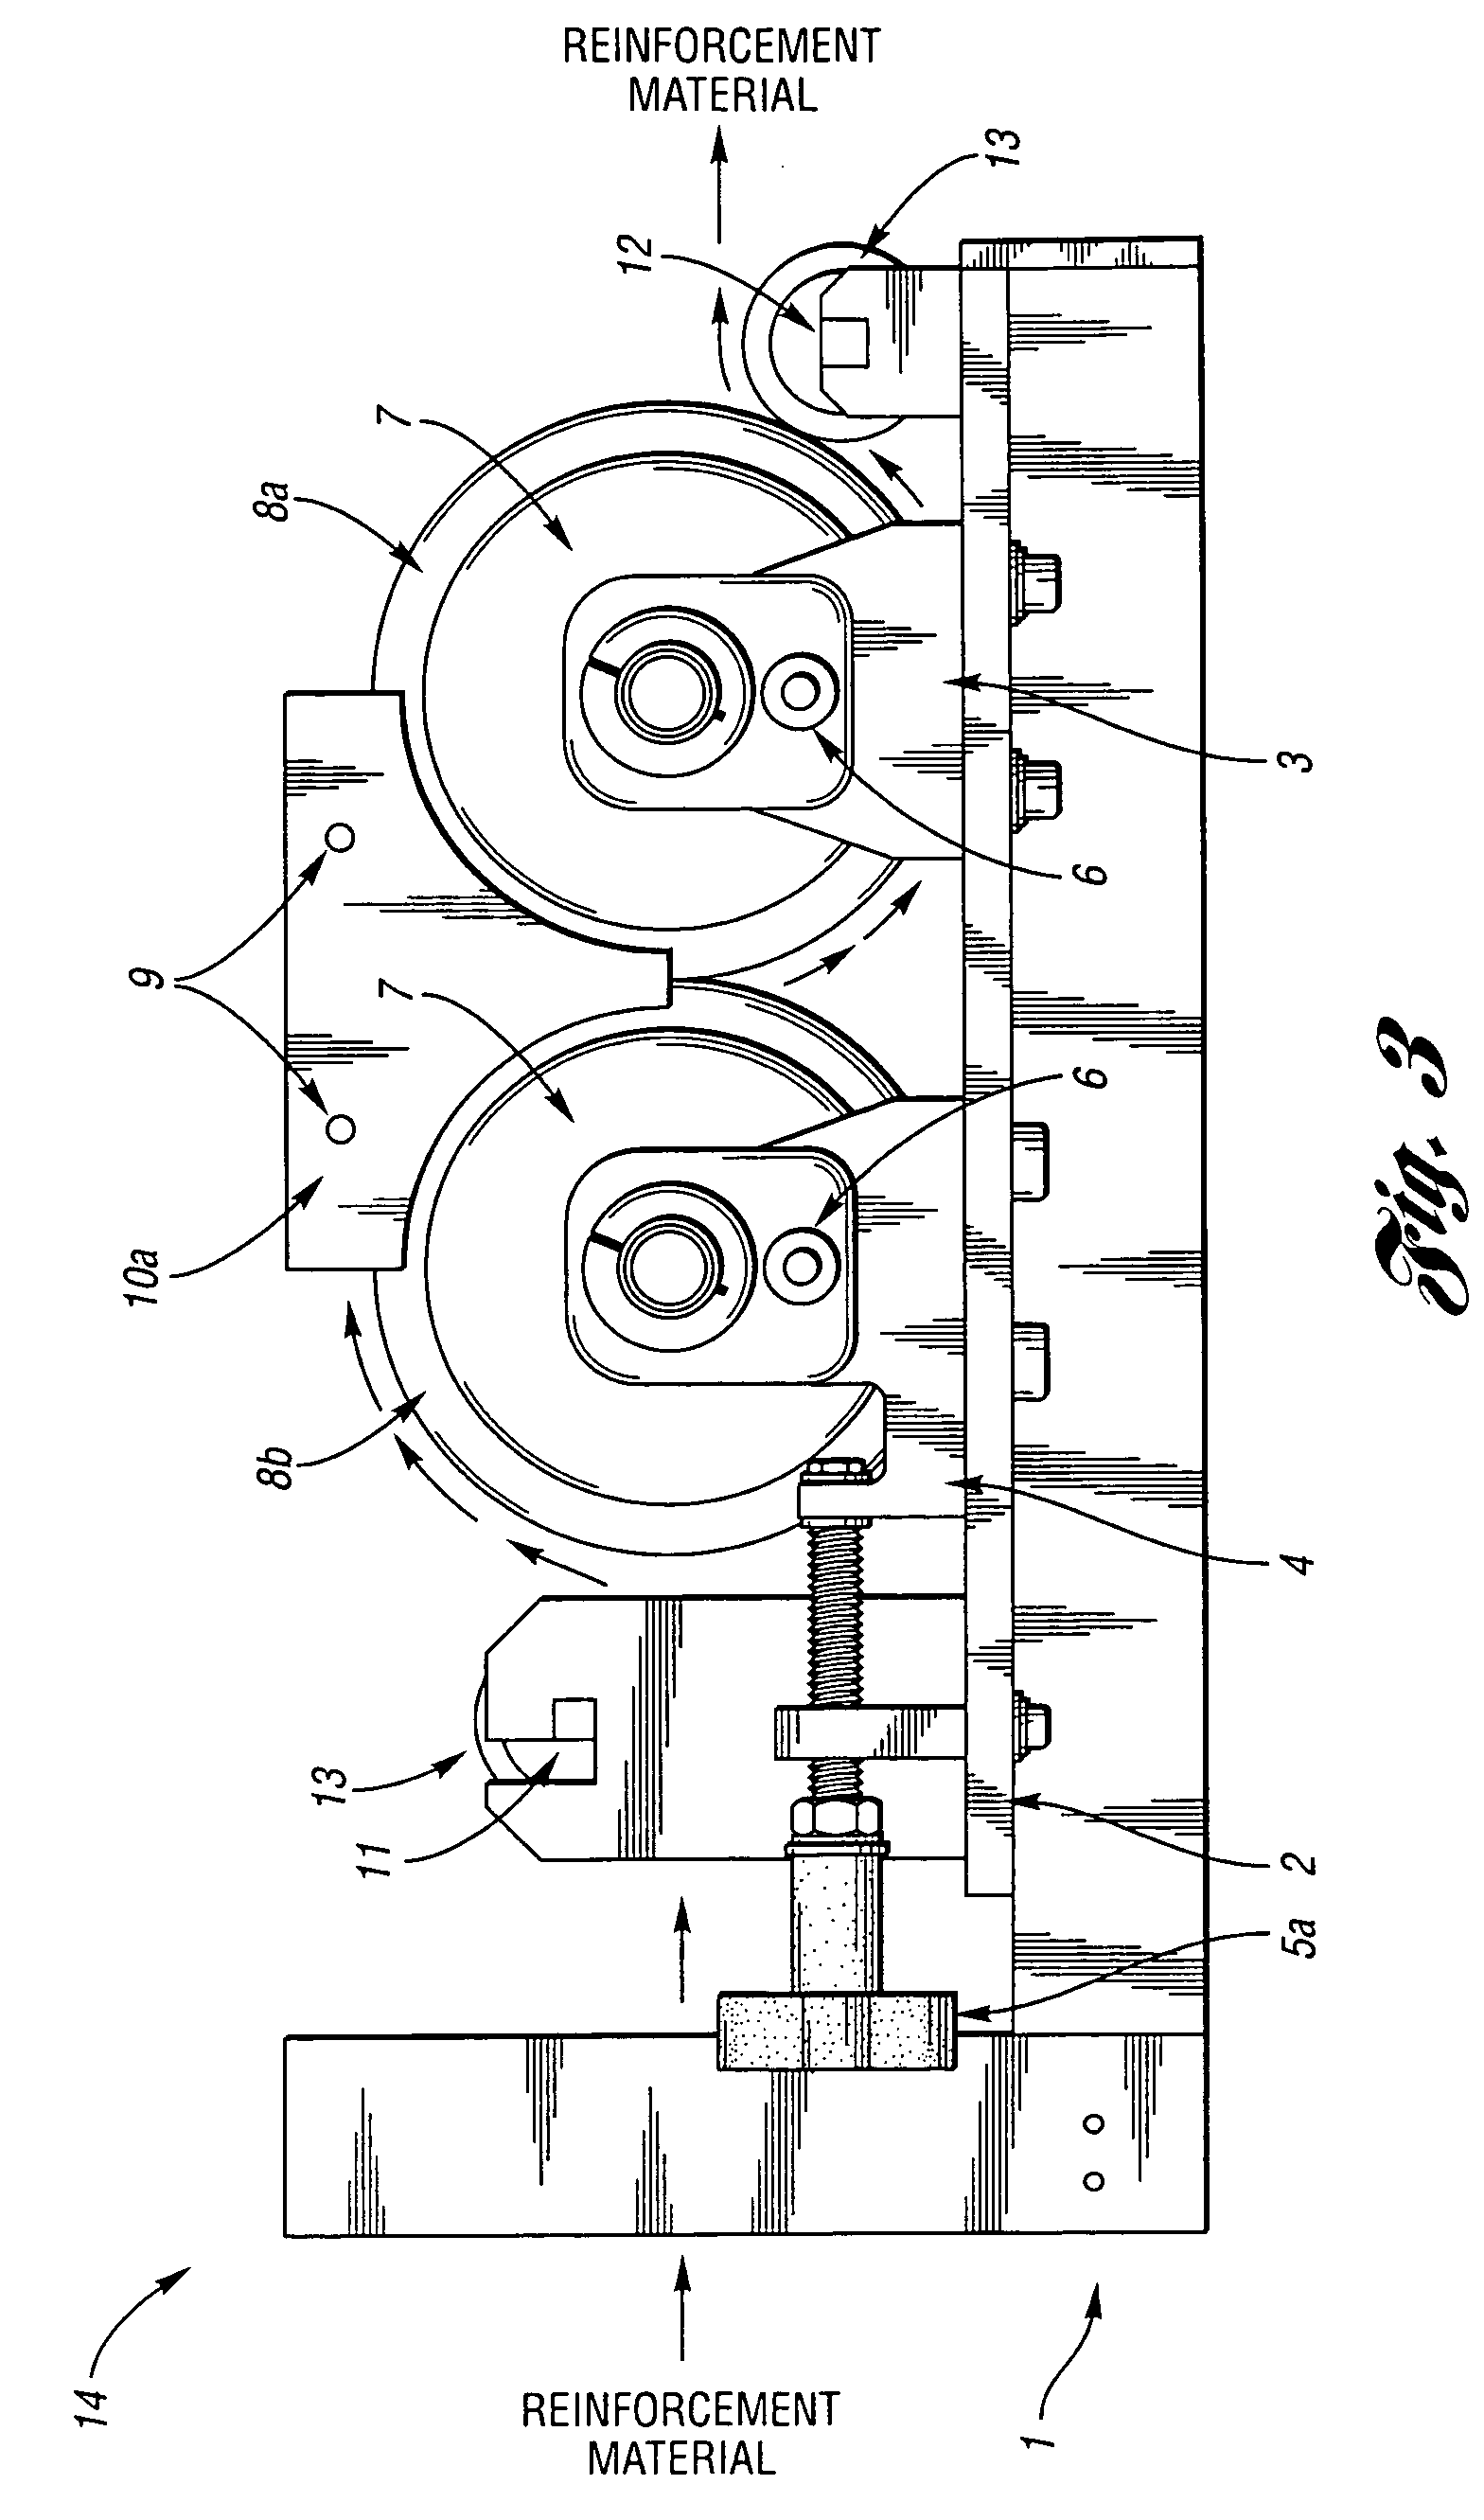 Apparatus for resin-impregnation of fibers for filament winding